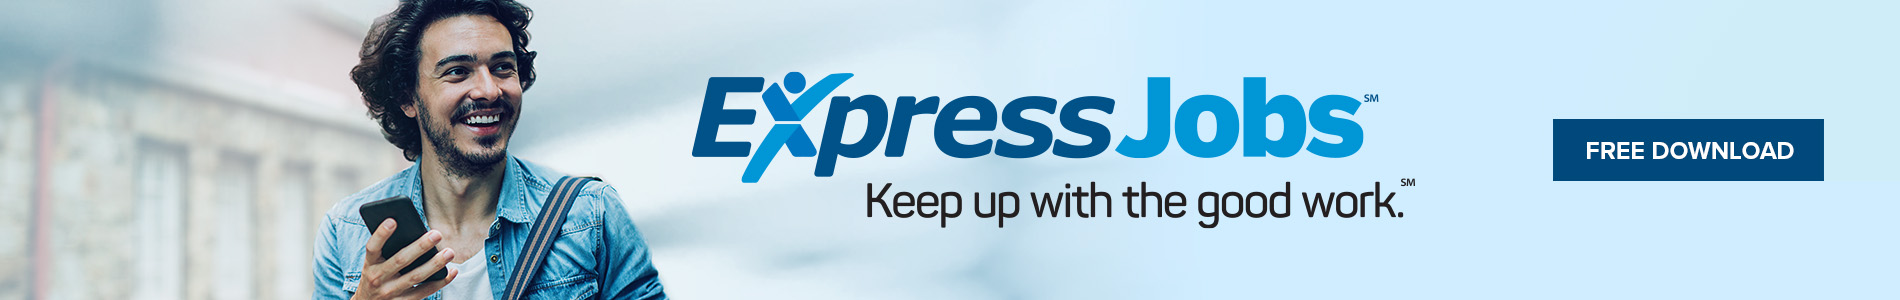 Promotional banner for Express Jobs with a smiling man holding a smartphone, and a "FREE DOWNLOAD" button.